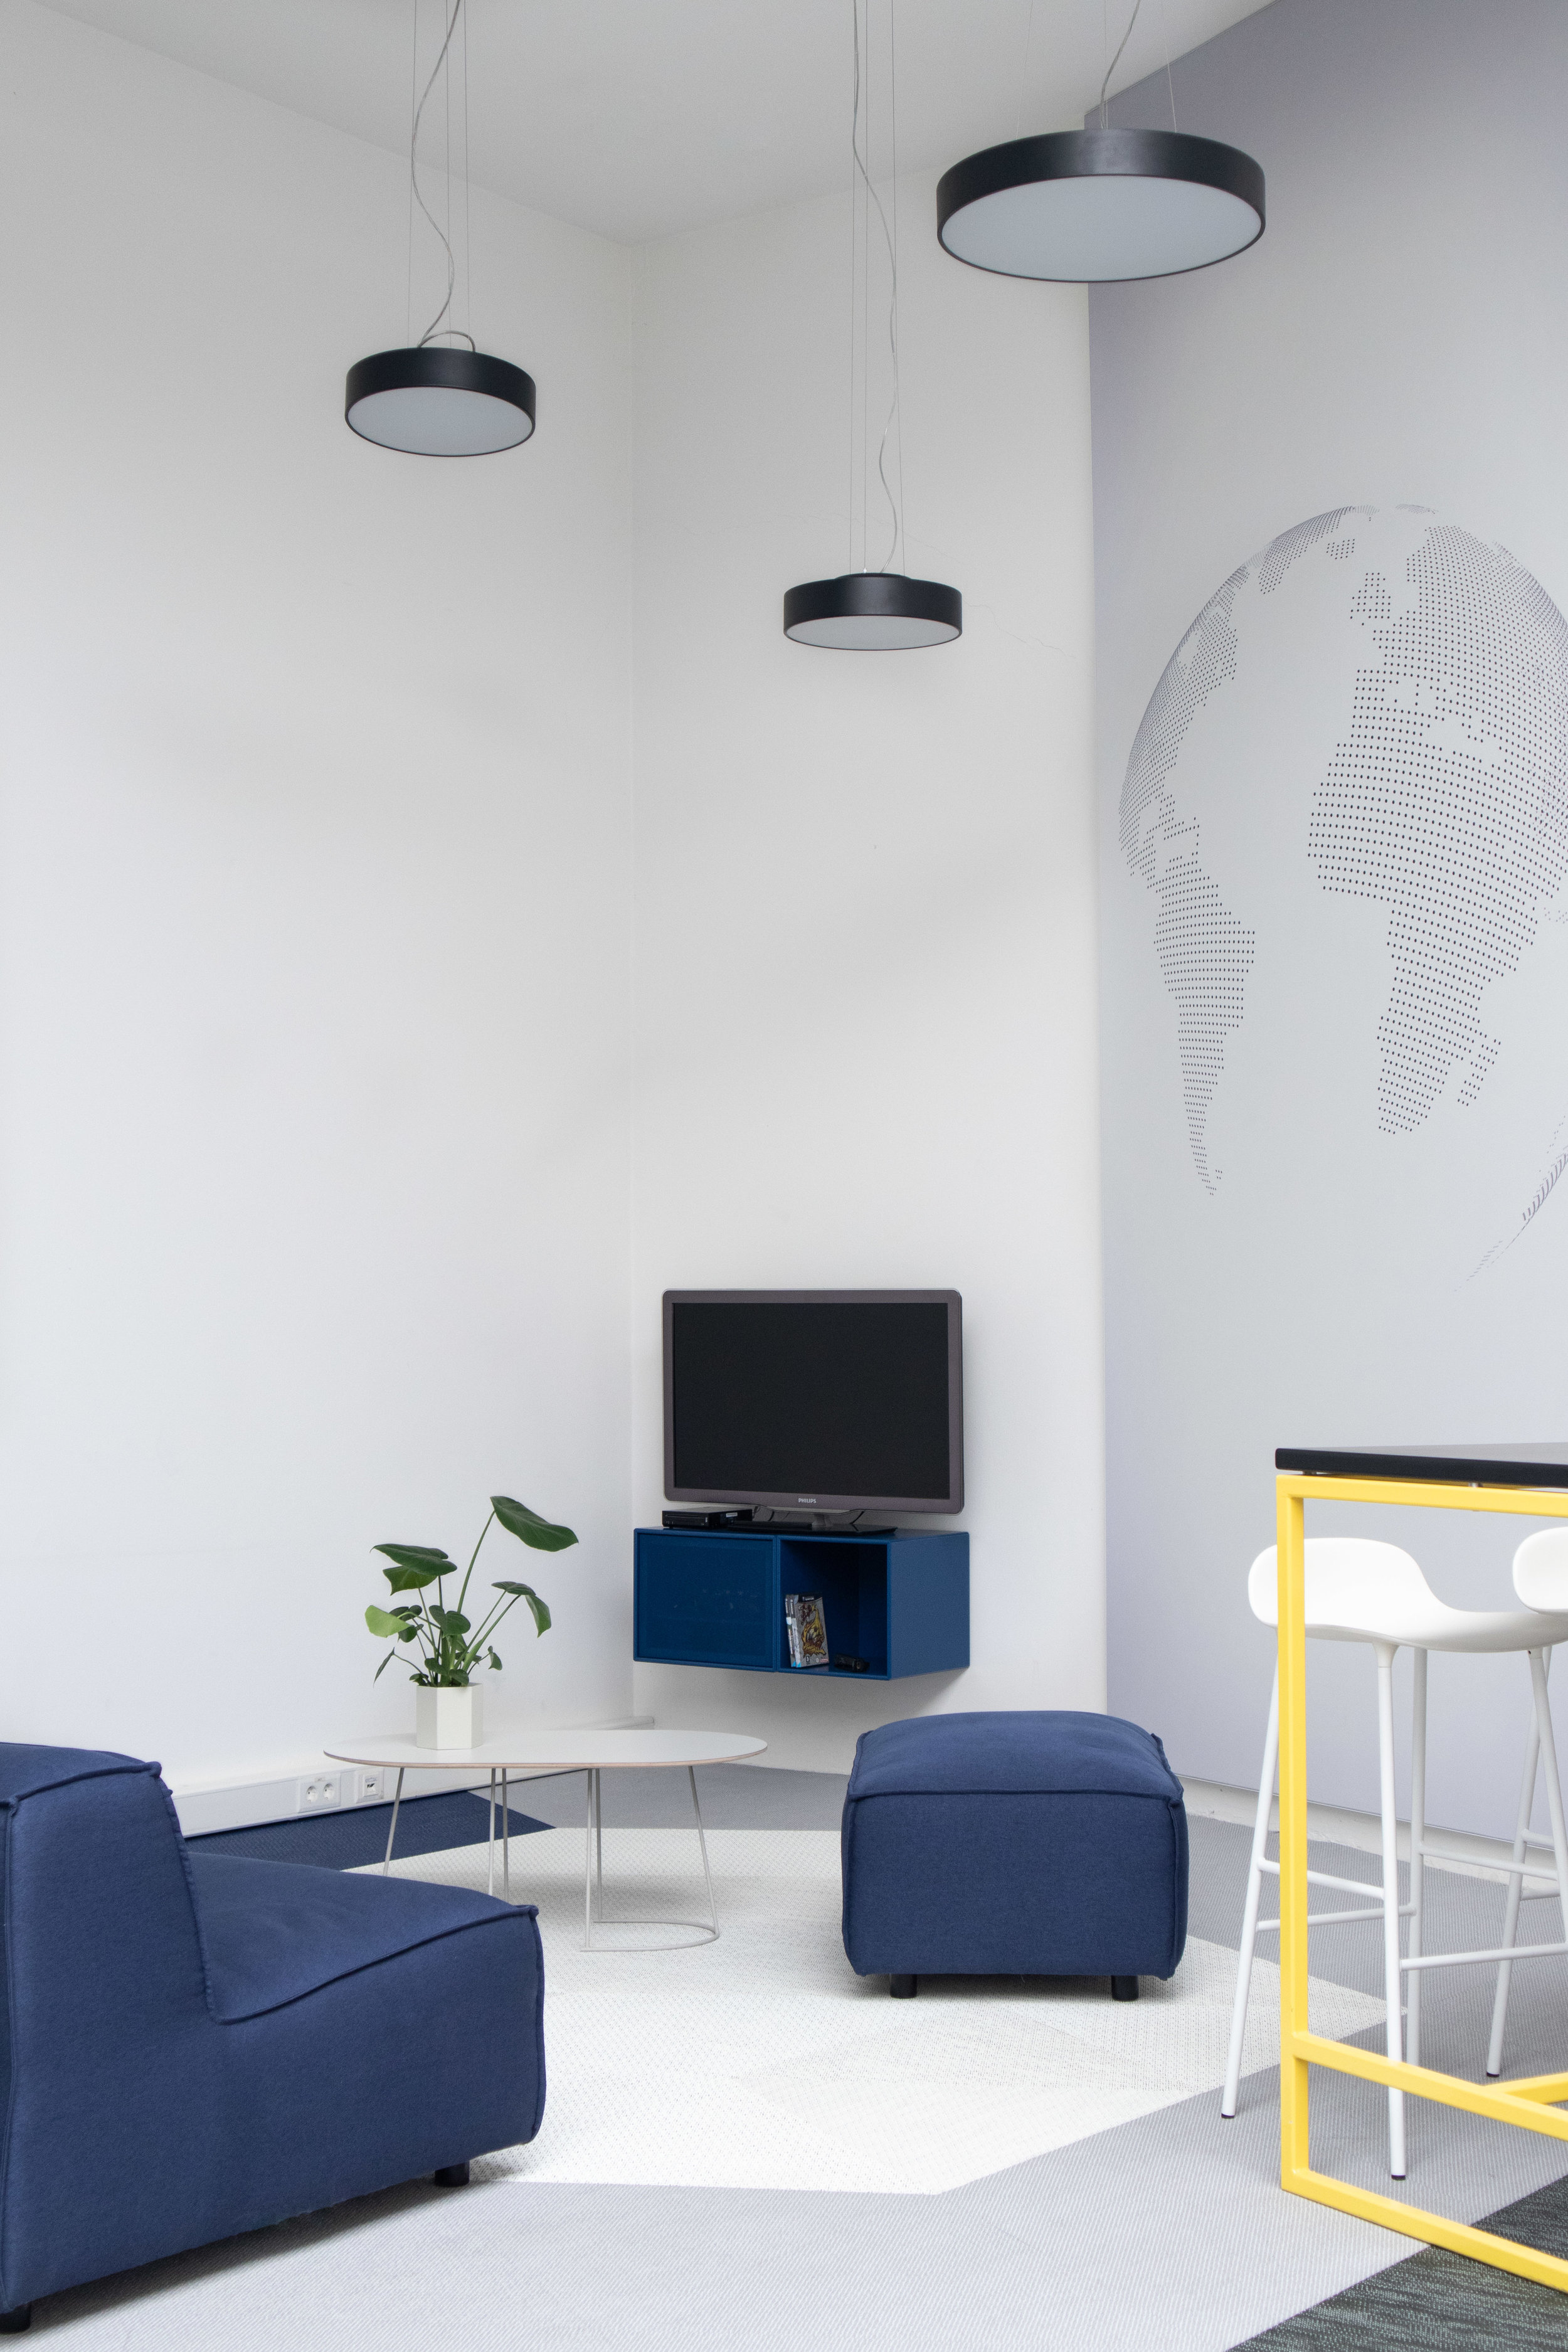 Lounge space, interior design project for Kors IT headquarters in Eindhoven 4.jpg